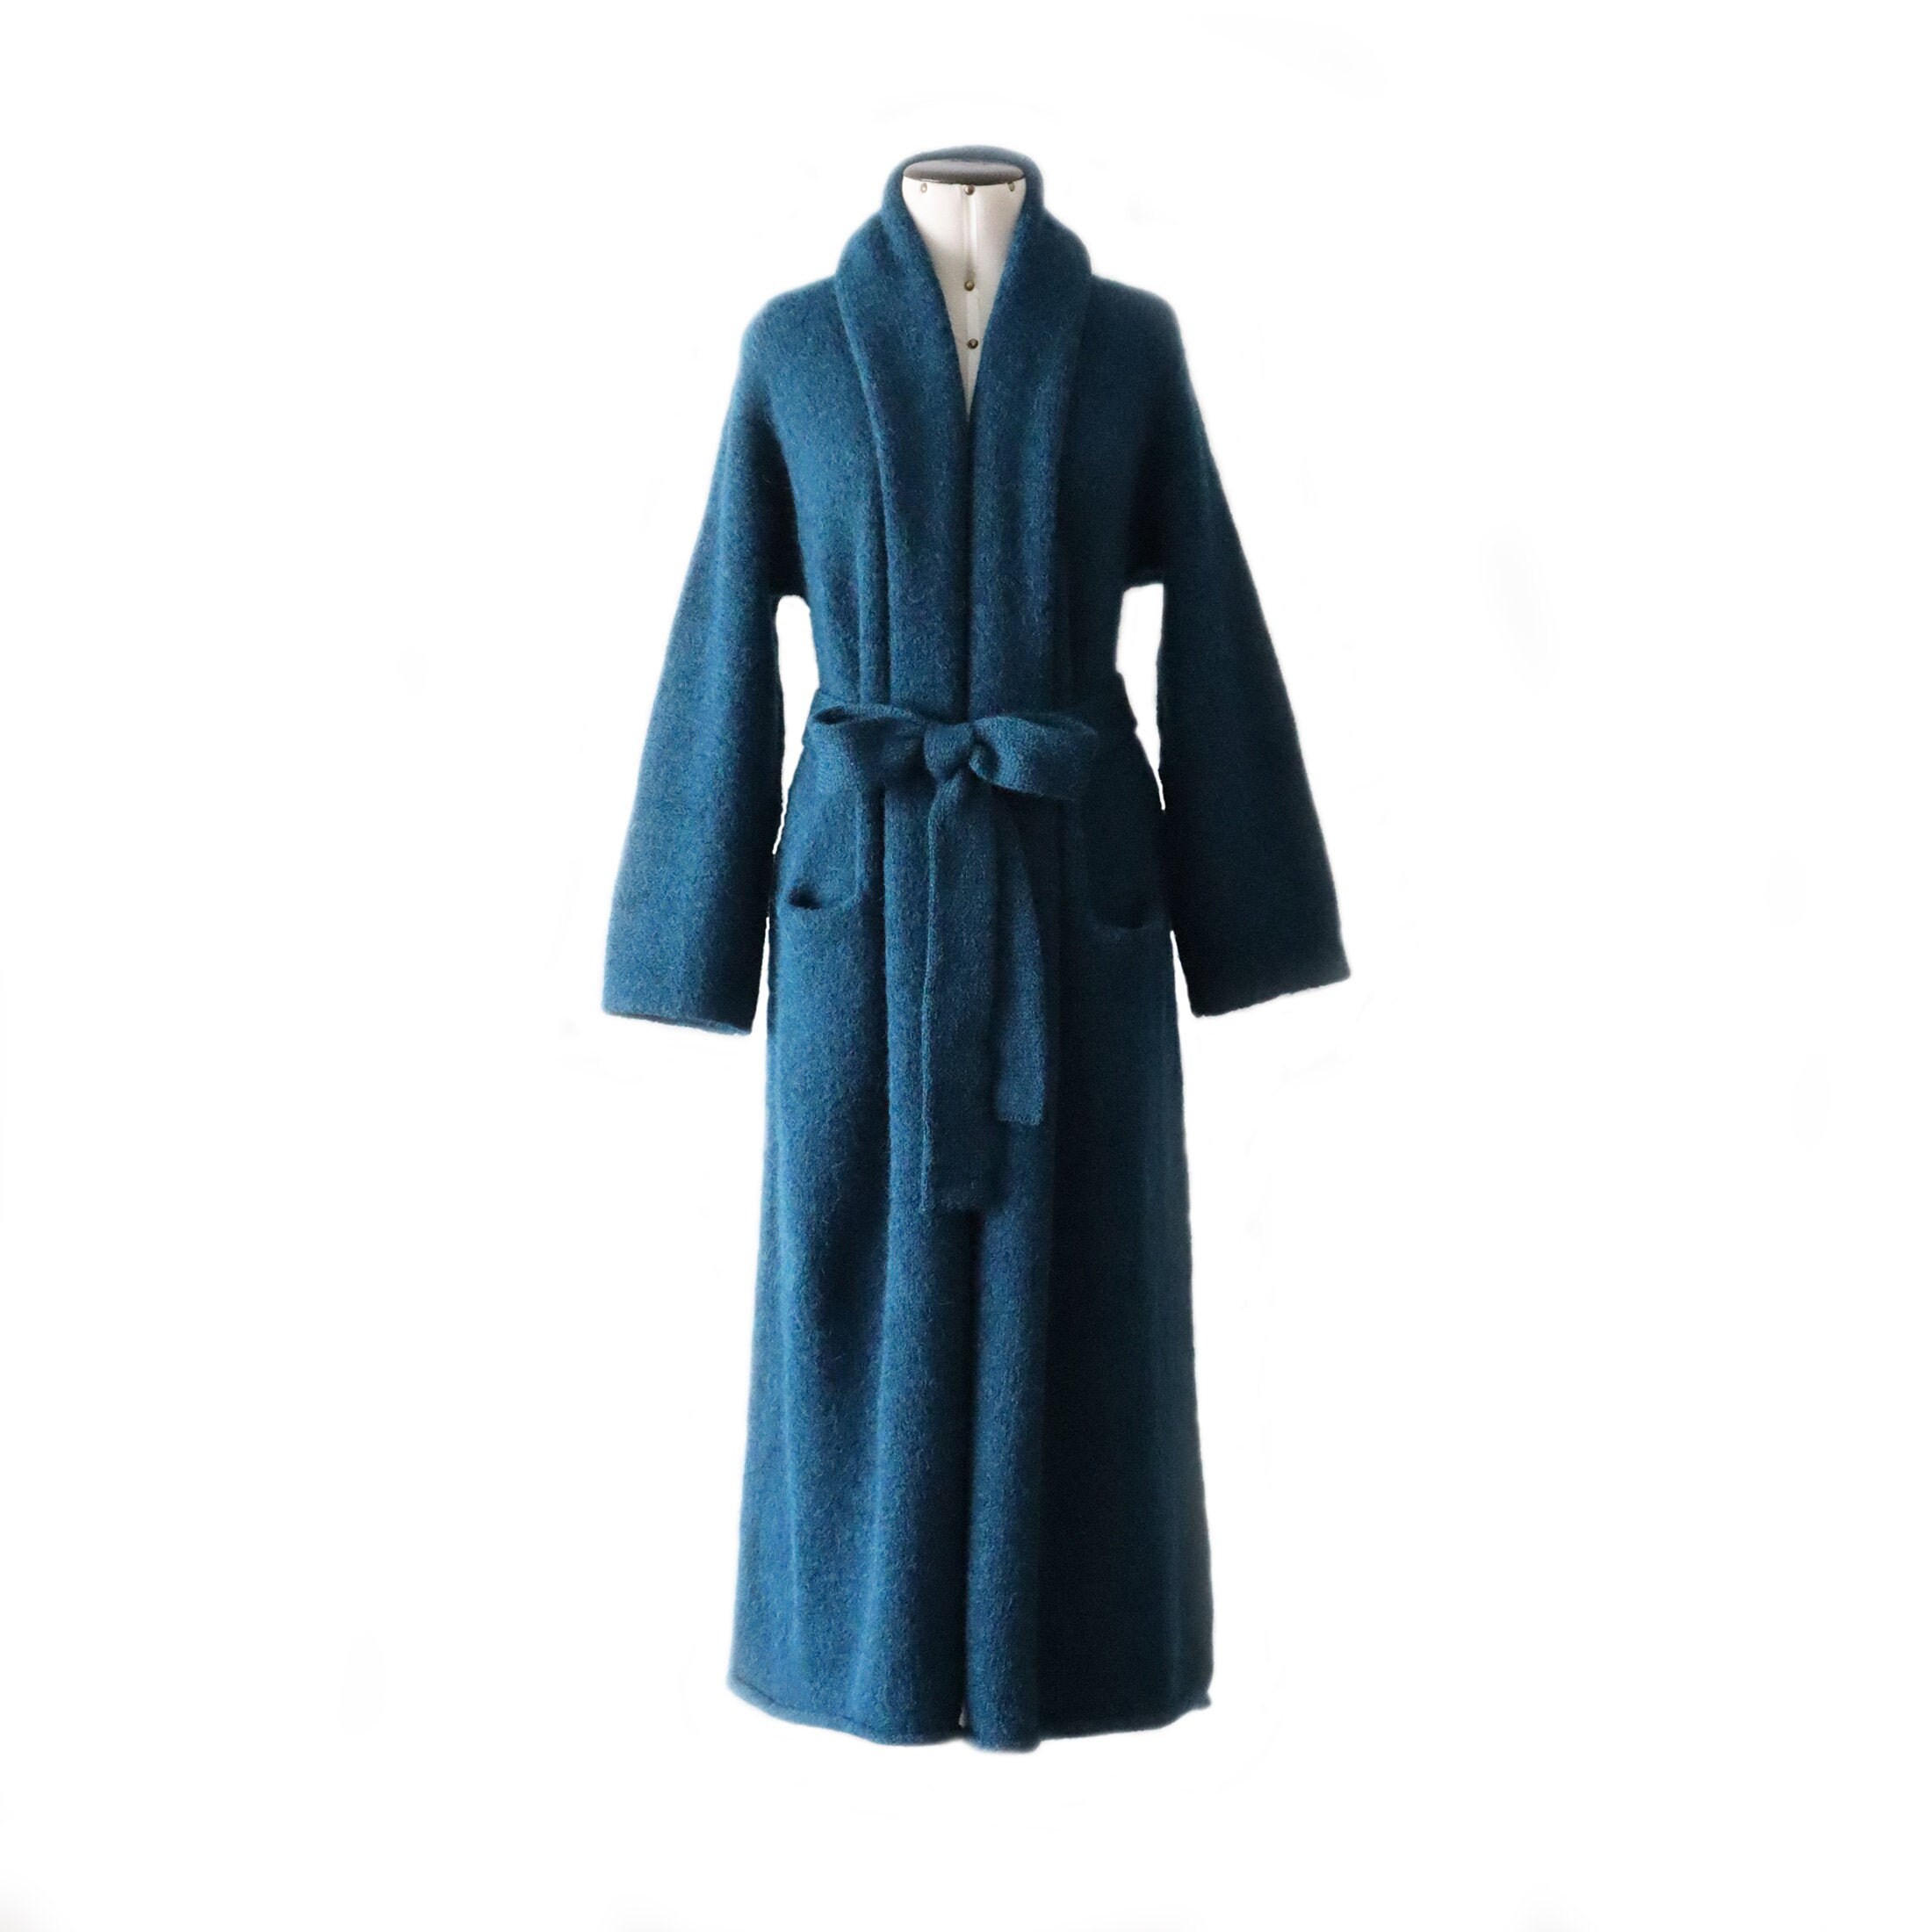 Capote Coat Felted Alpaca Blend 48 Inch/122 cm Non Hooded Oversized With Belt